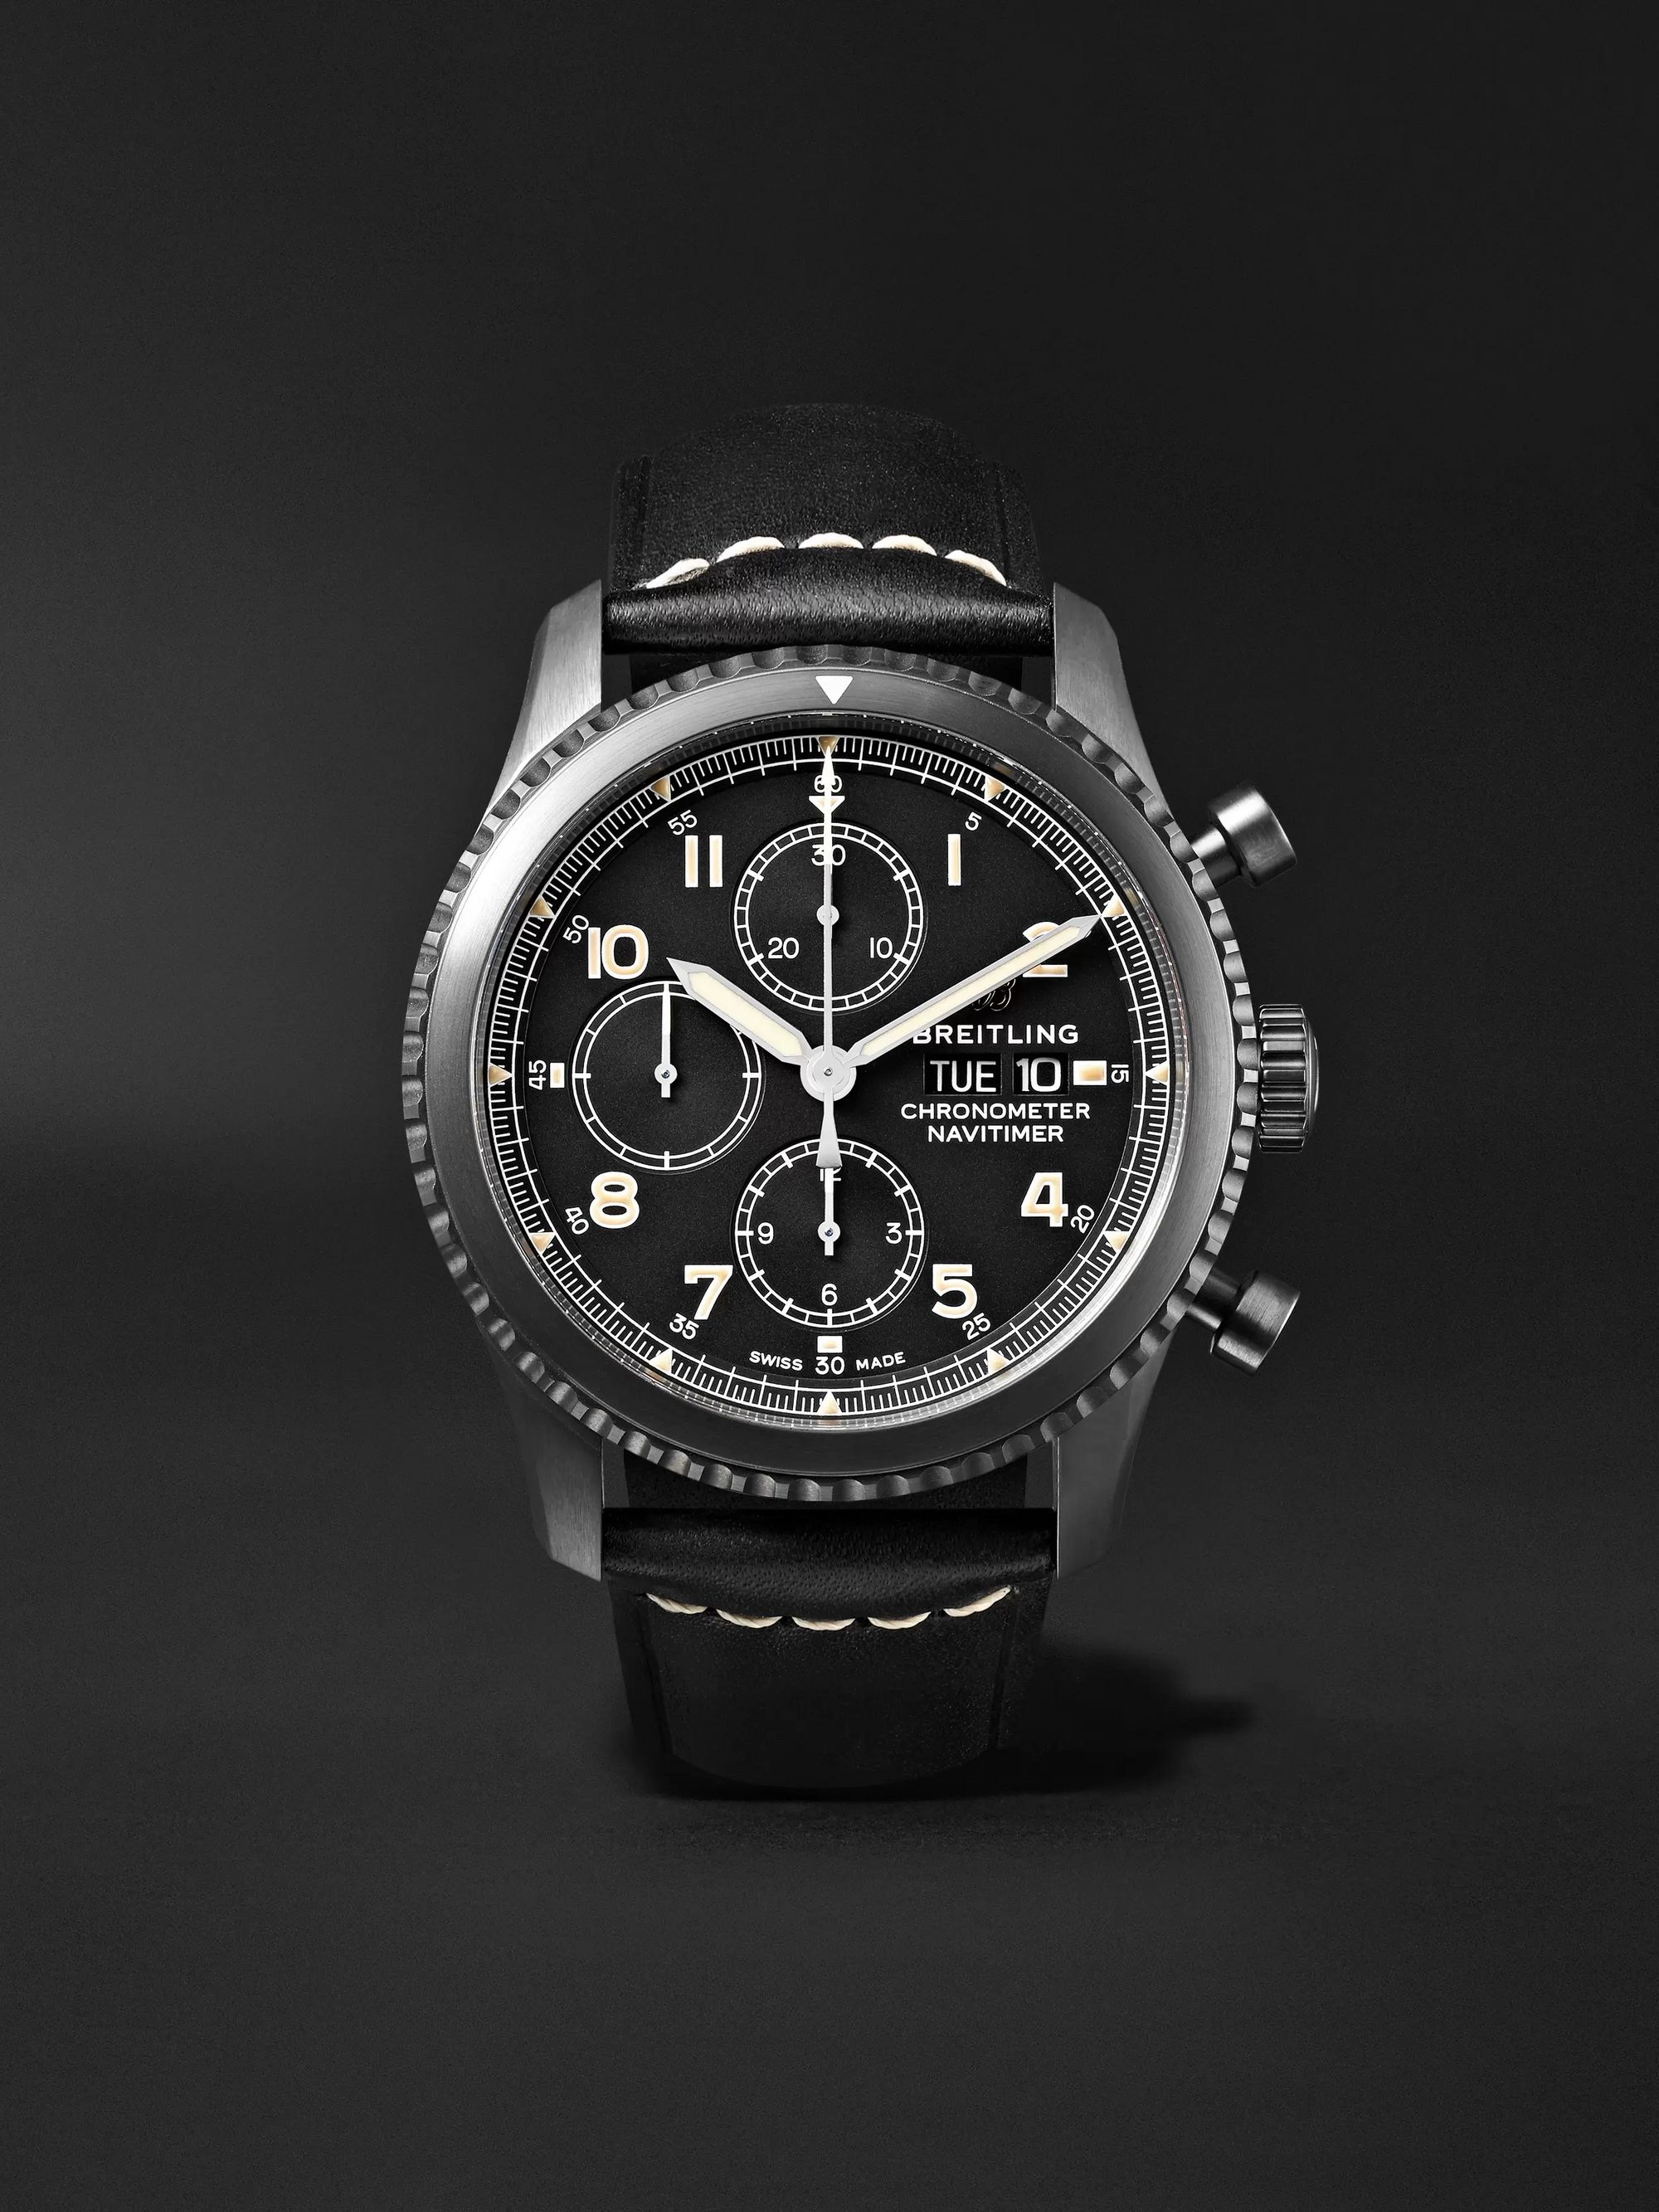 Black Navitimer 8 Automatic Chronograph 43mm Black Steel and Leather Watch,  Ref. No. M13314101B1X1 | BREITLING | MR PORTER